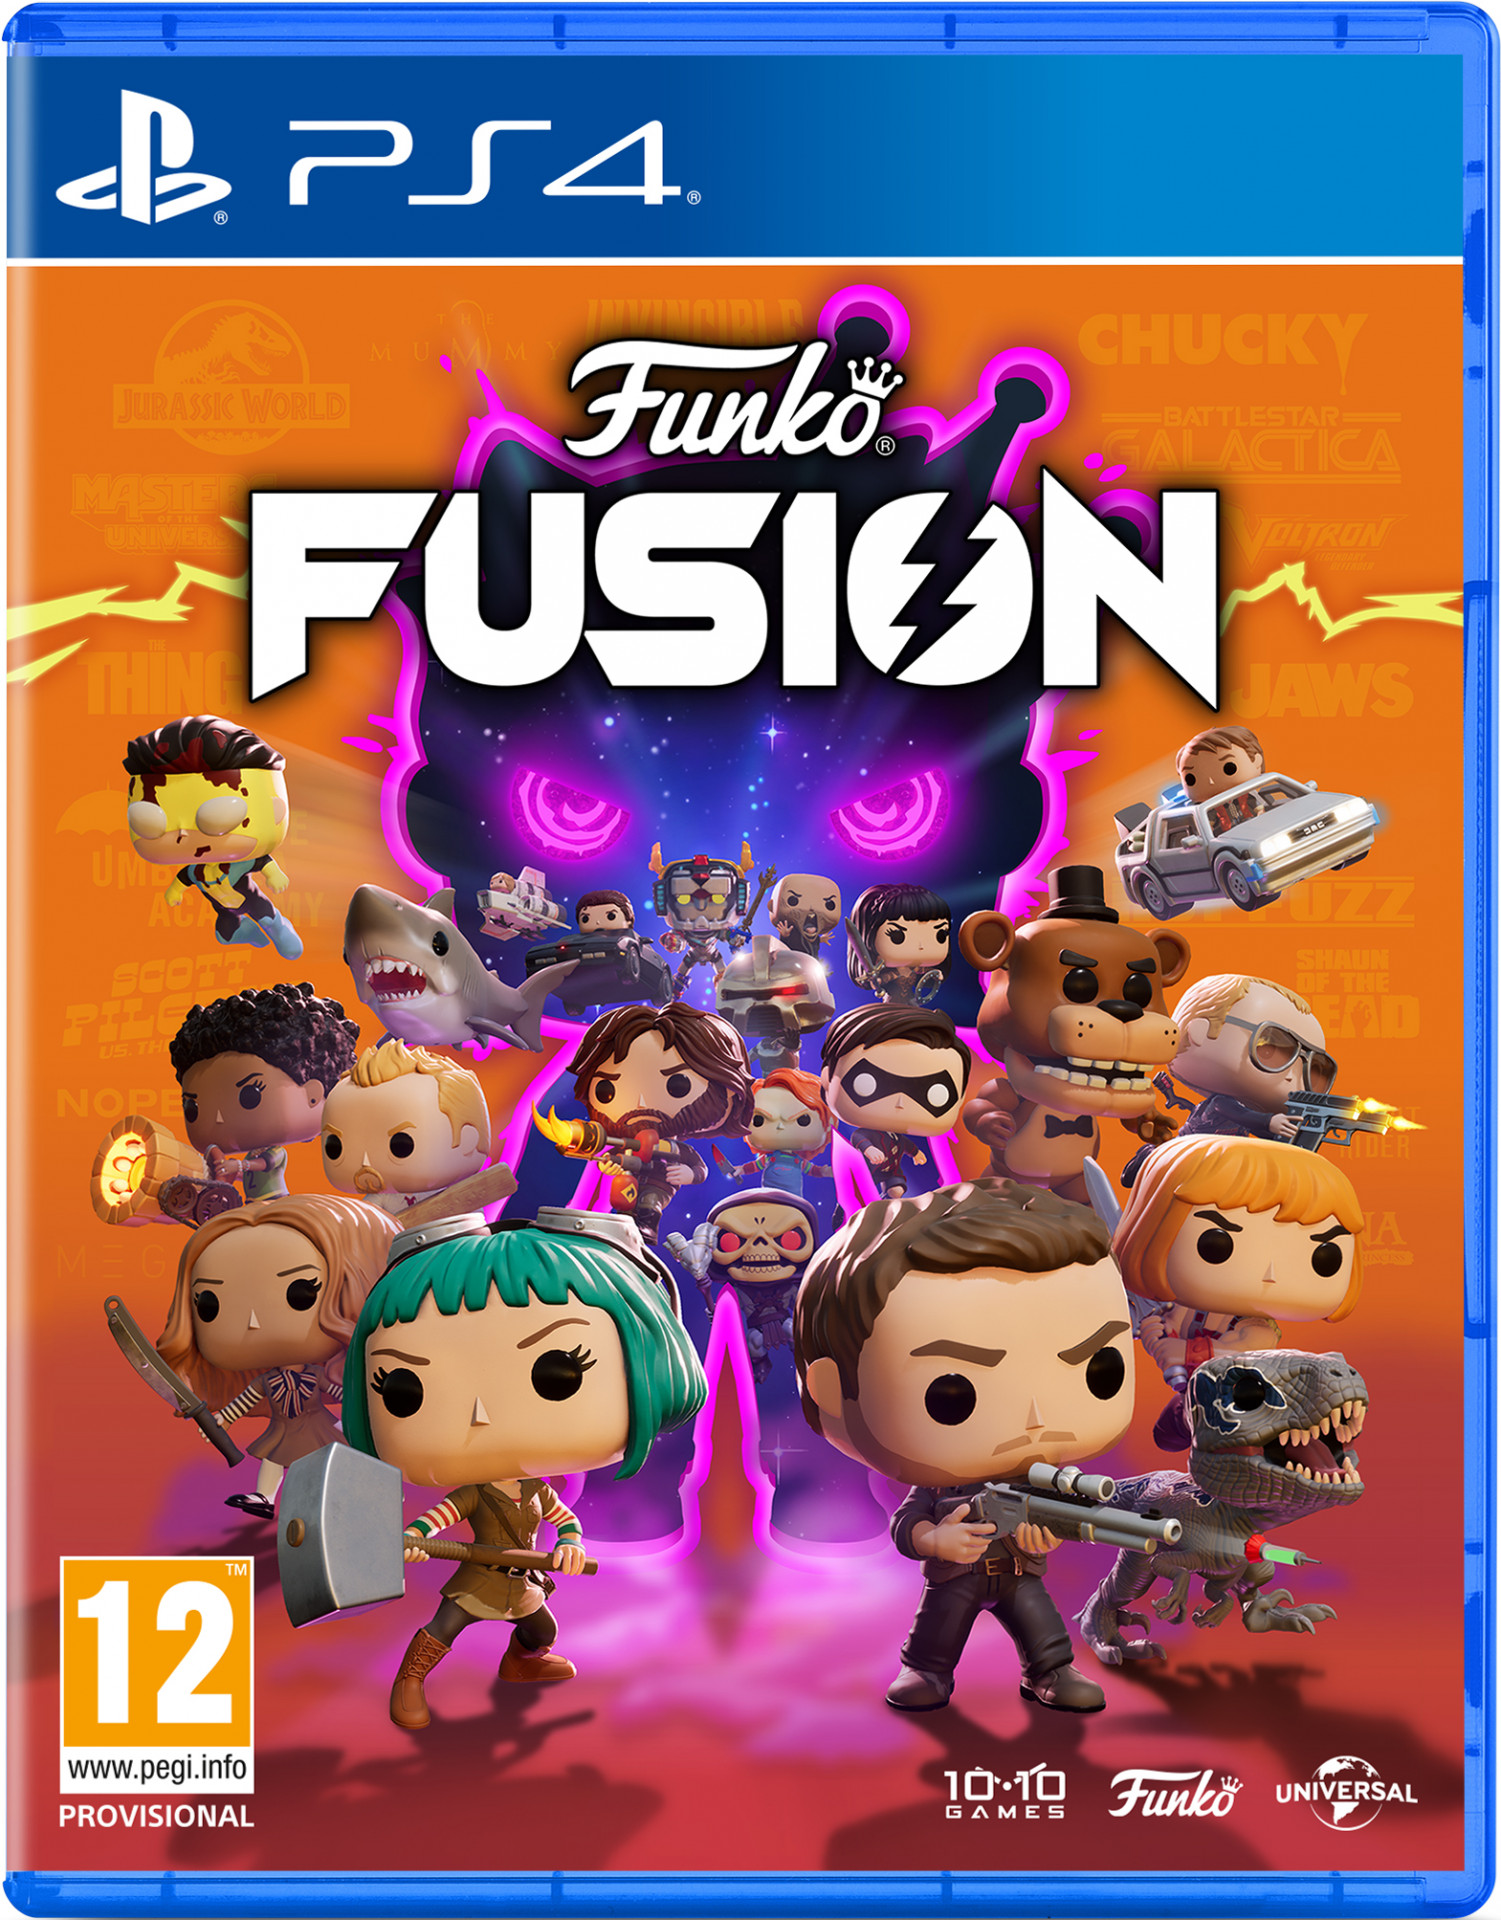 Funko Fusion (PS4), 10:10 Games Limited